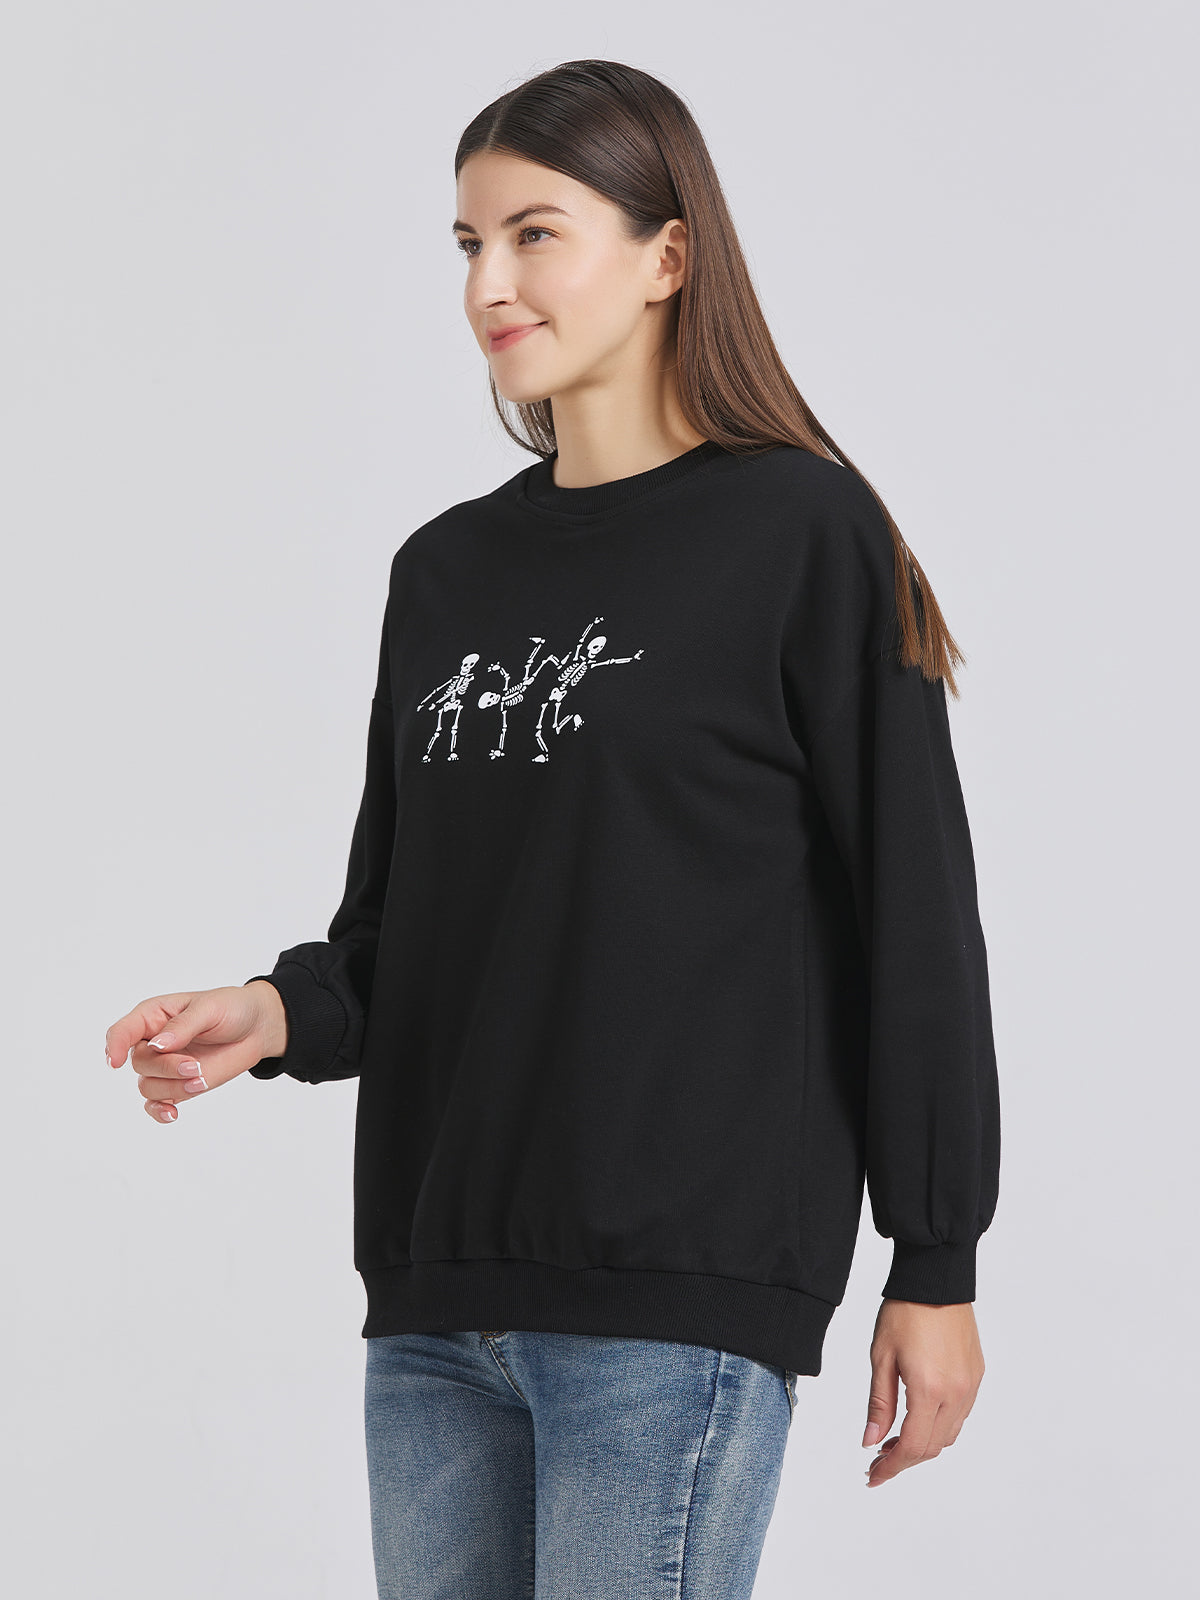 Fun and mysterious holiday attire: The allure of the black bat wing sweatshirt.